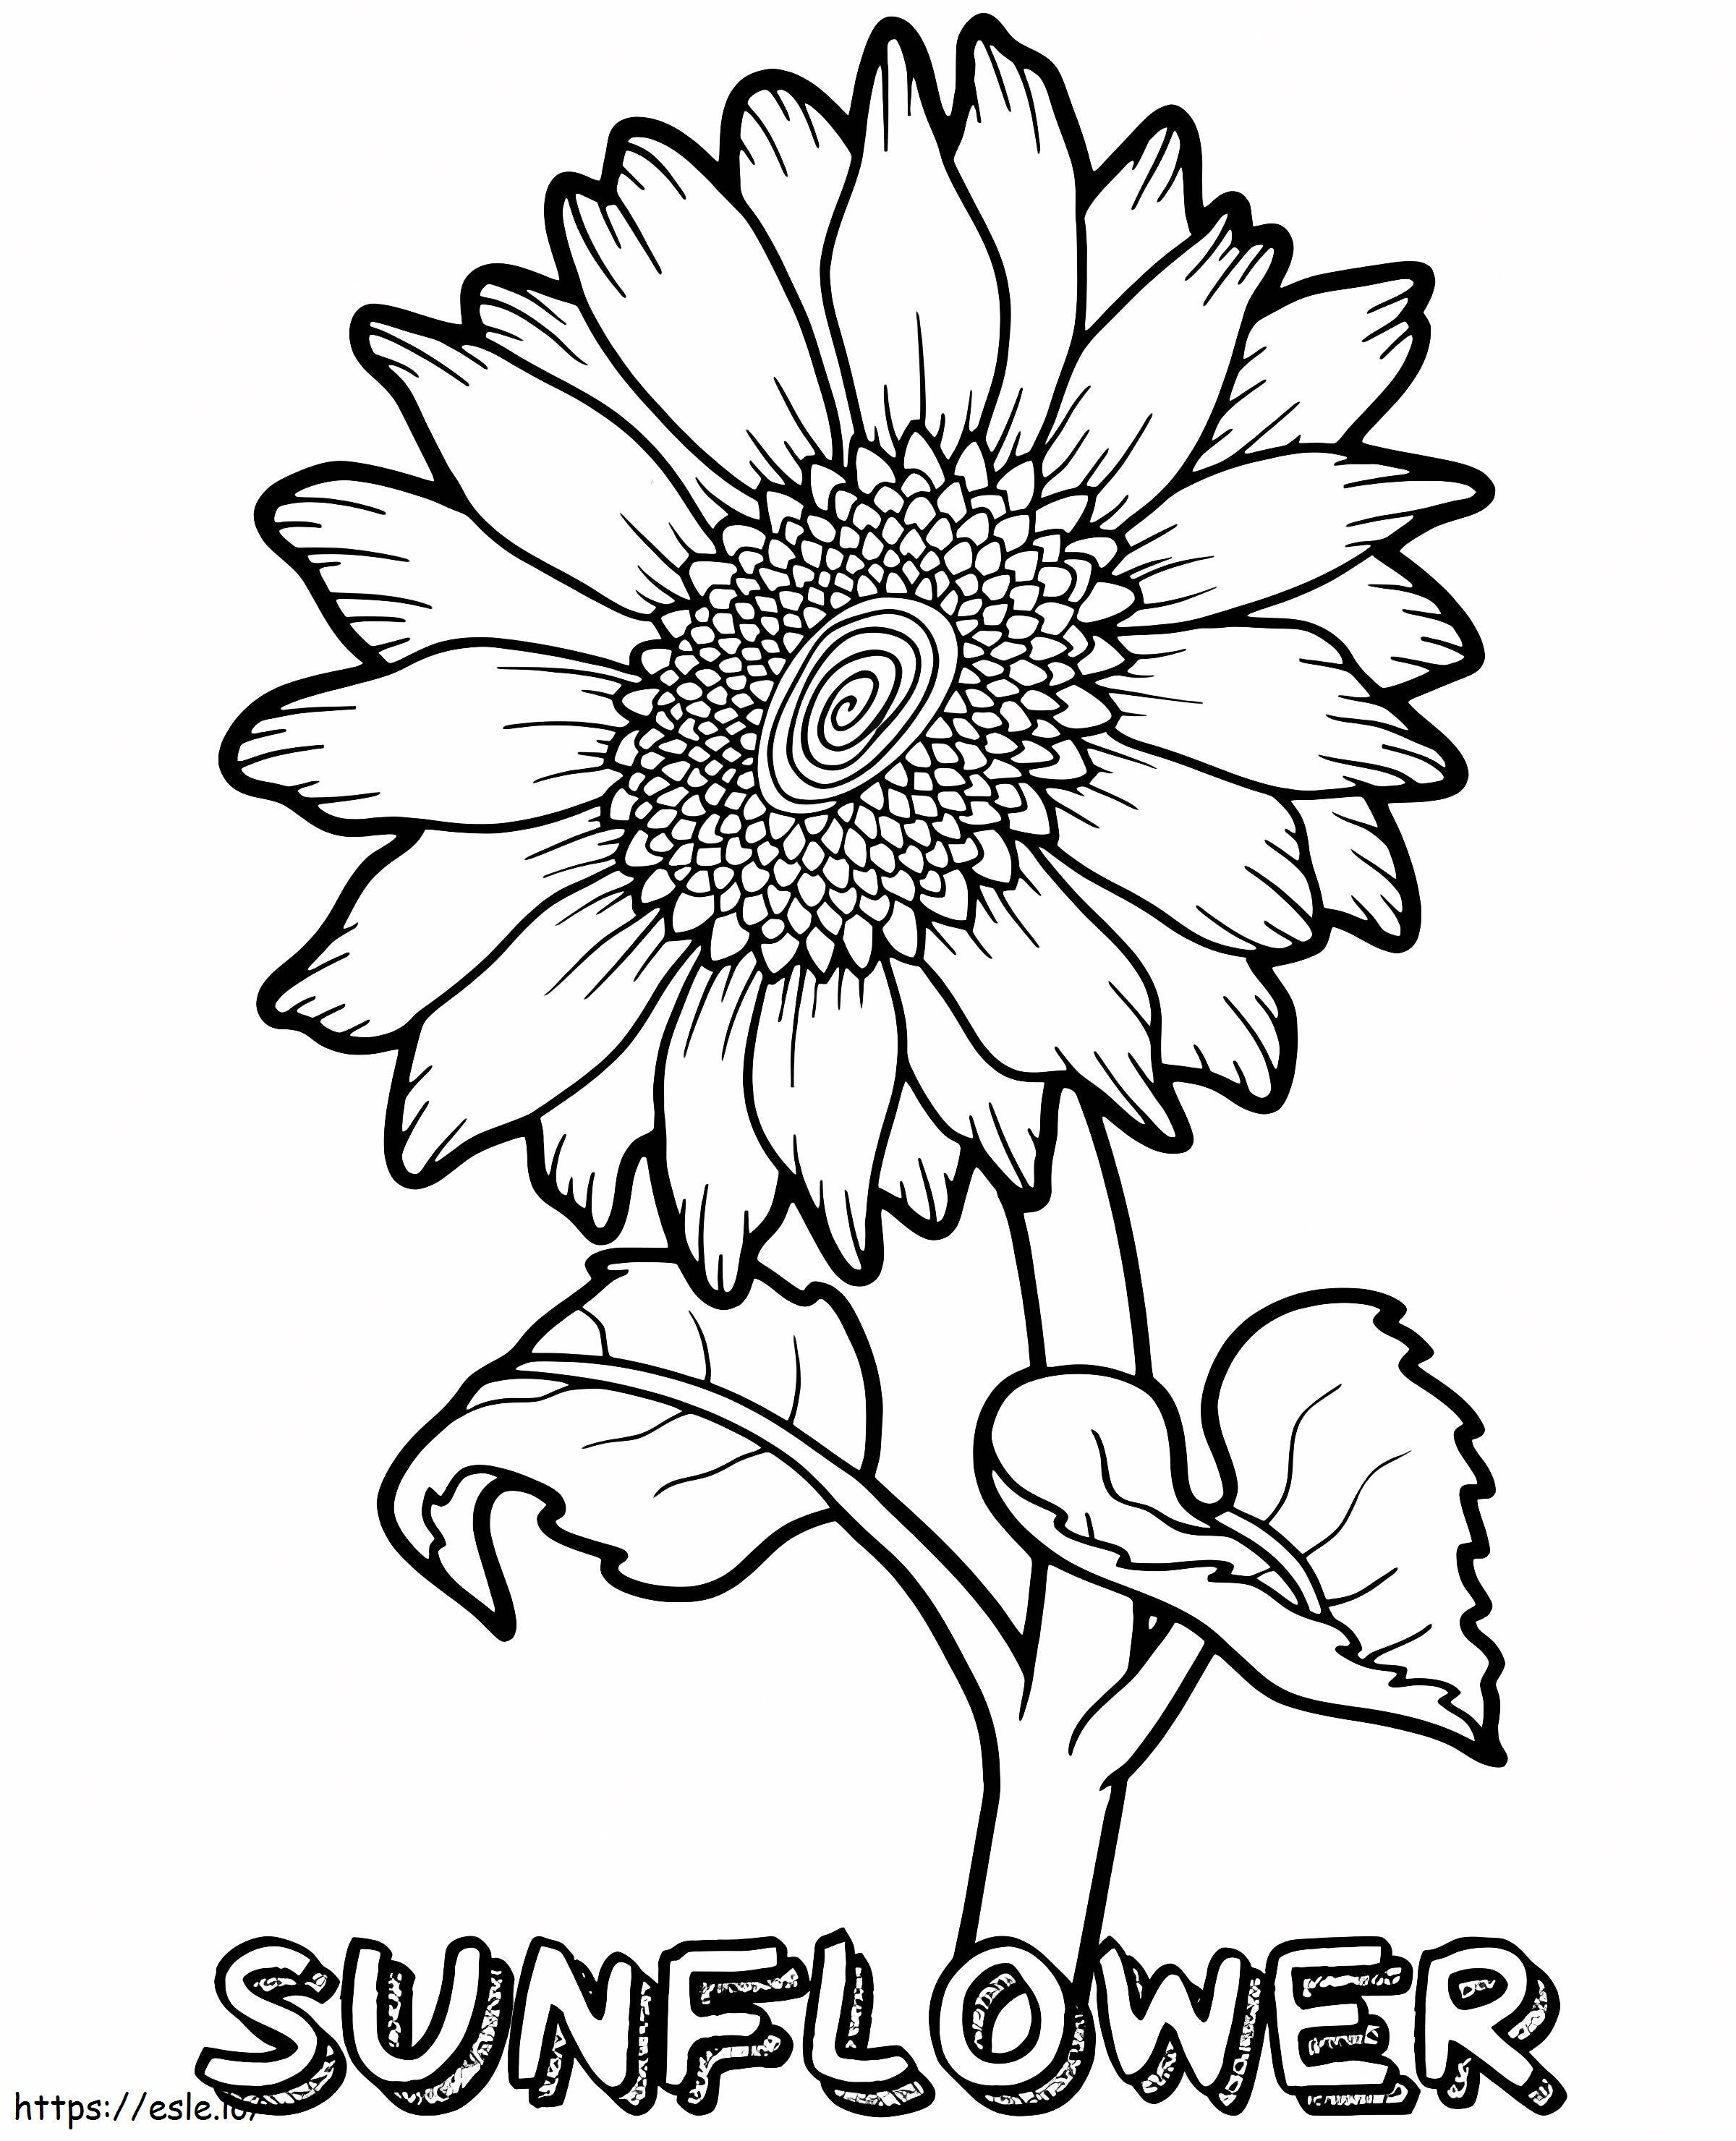 A Big Sunflower coloring page